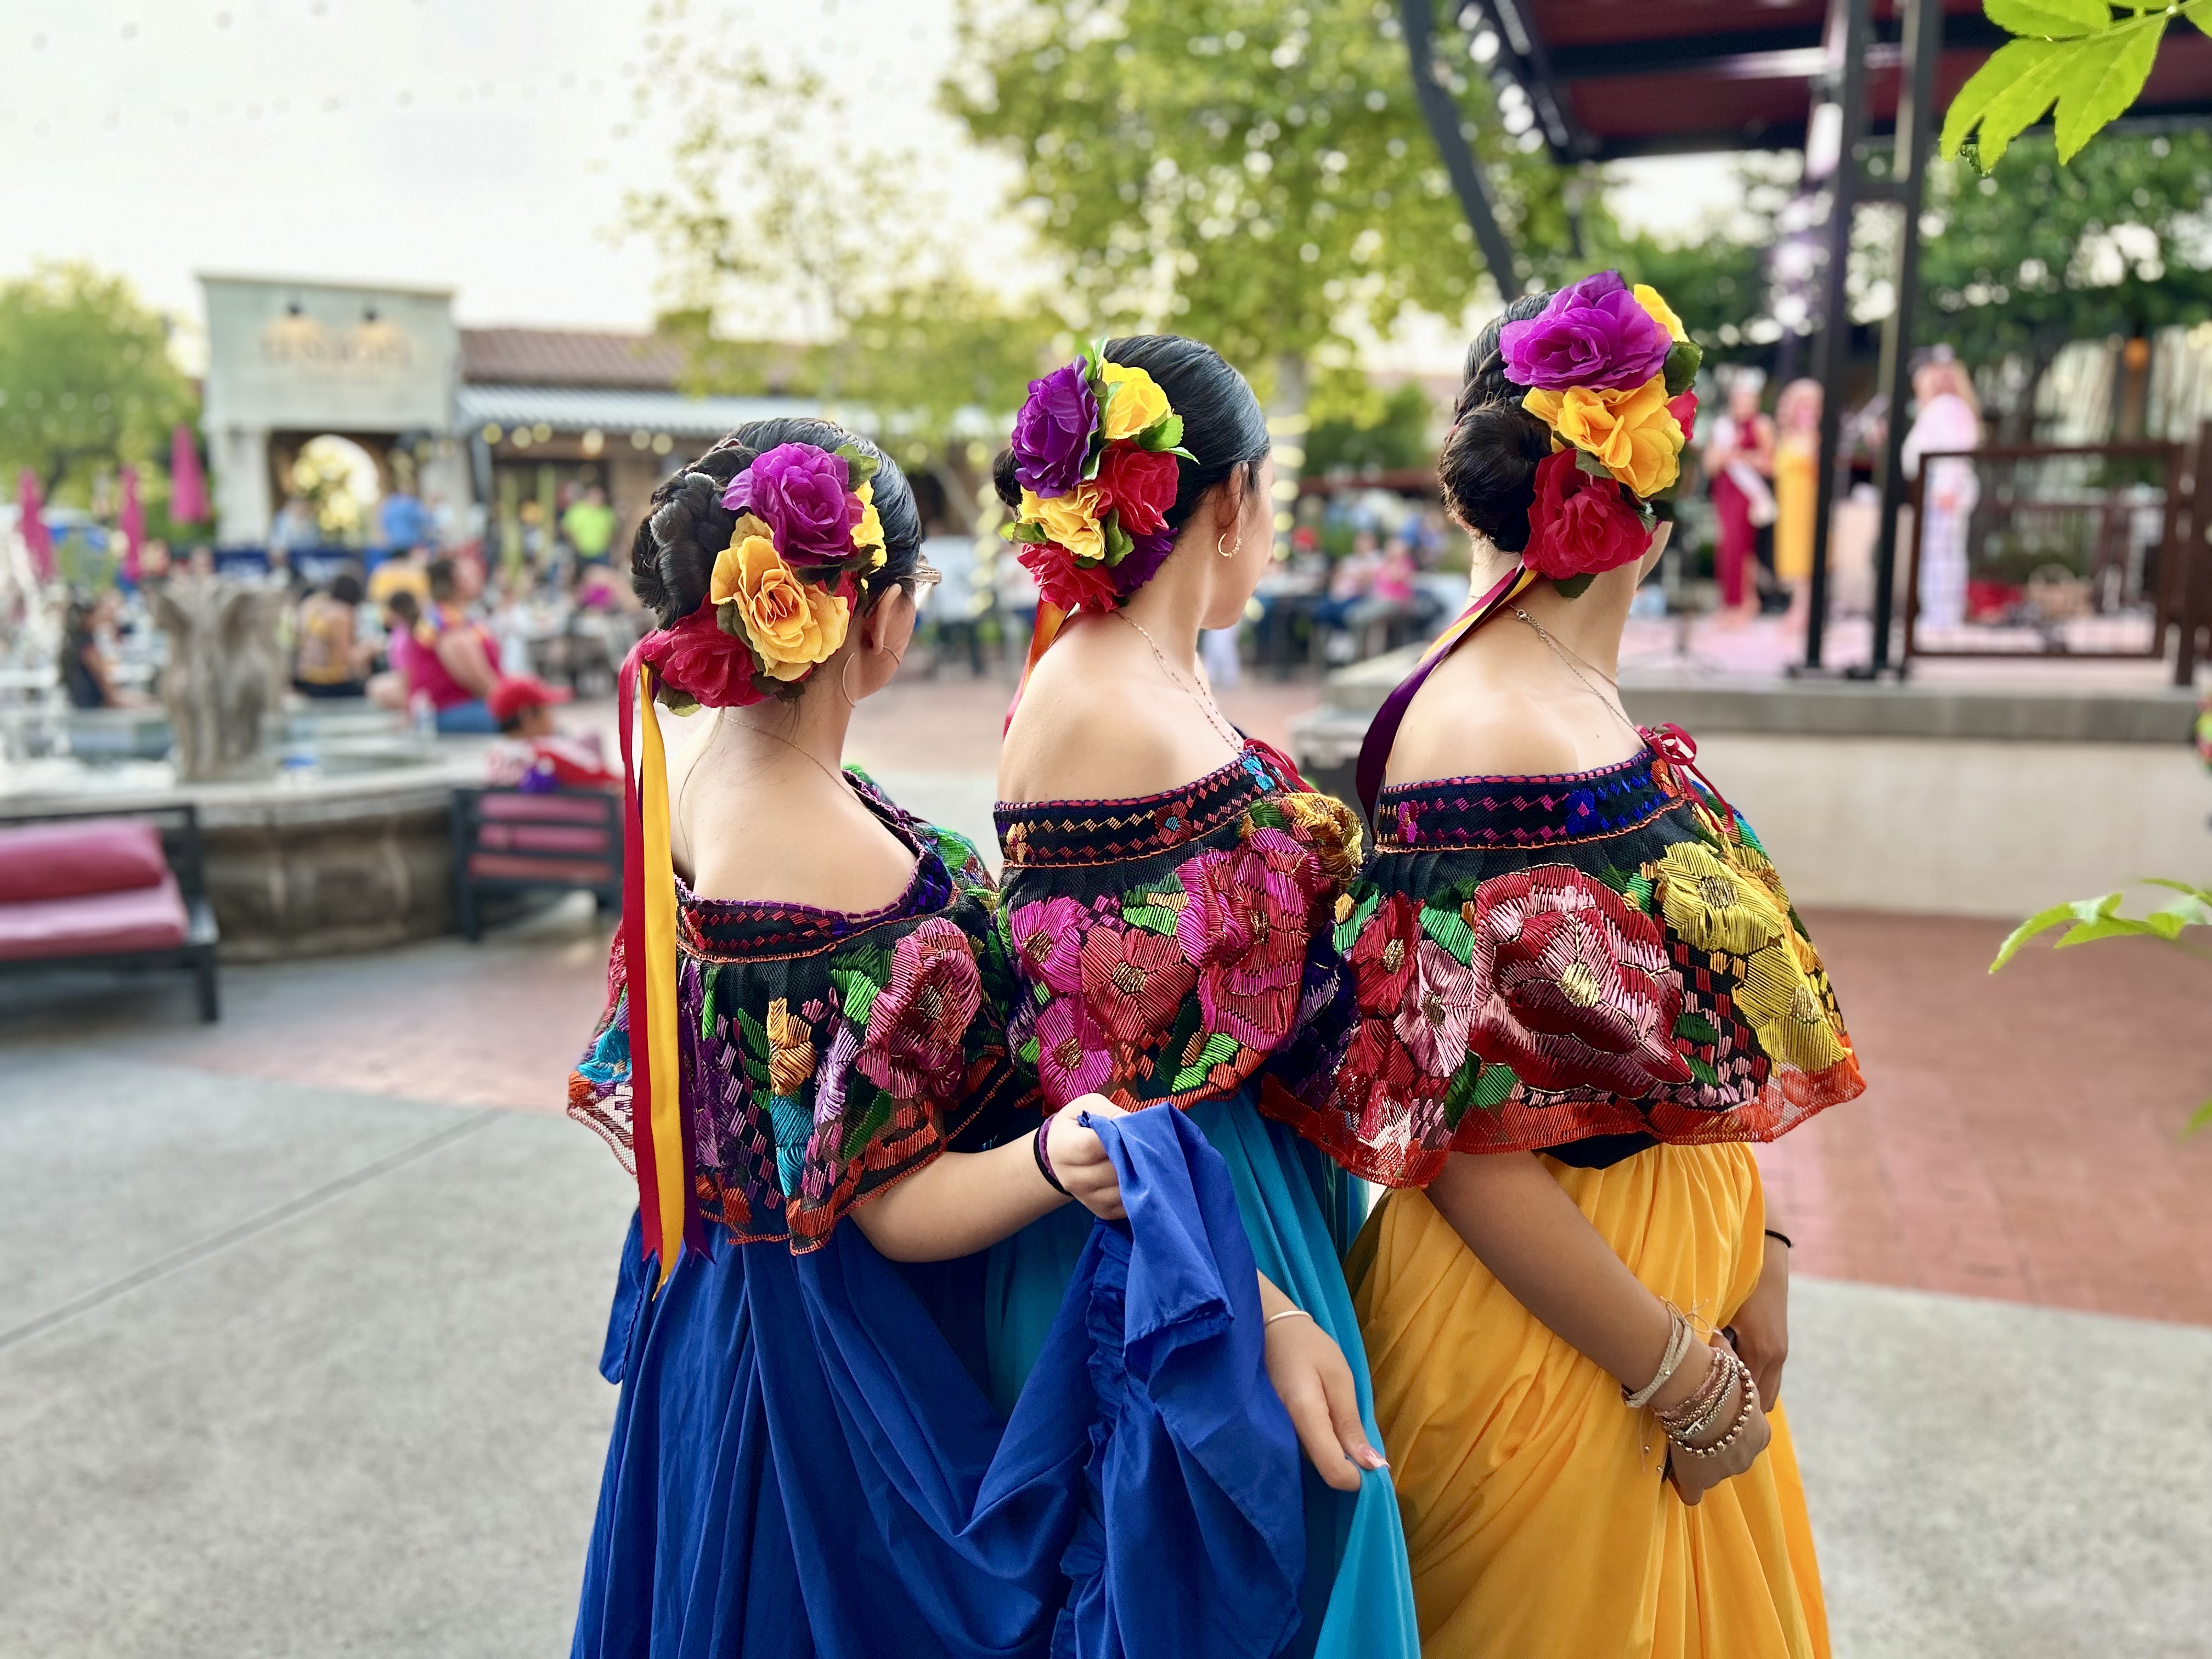 Three dark haired girls pose in their traditional colorful dresses and flower headpieces